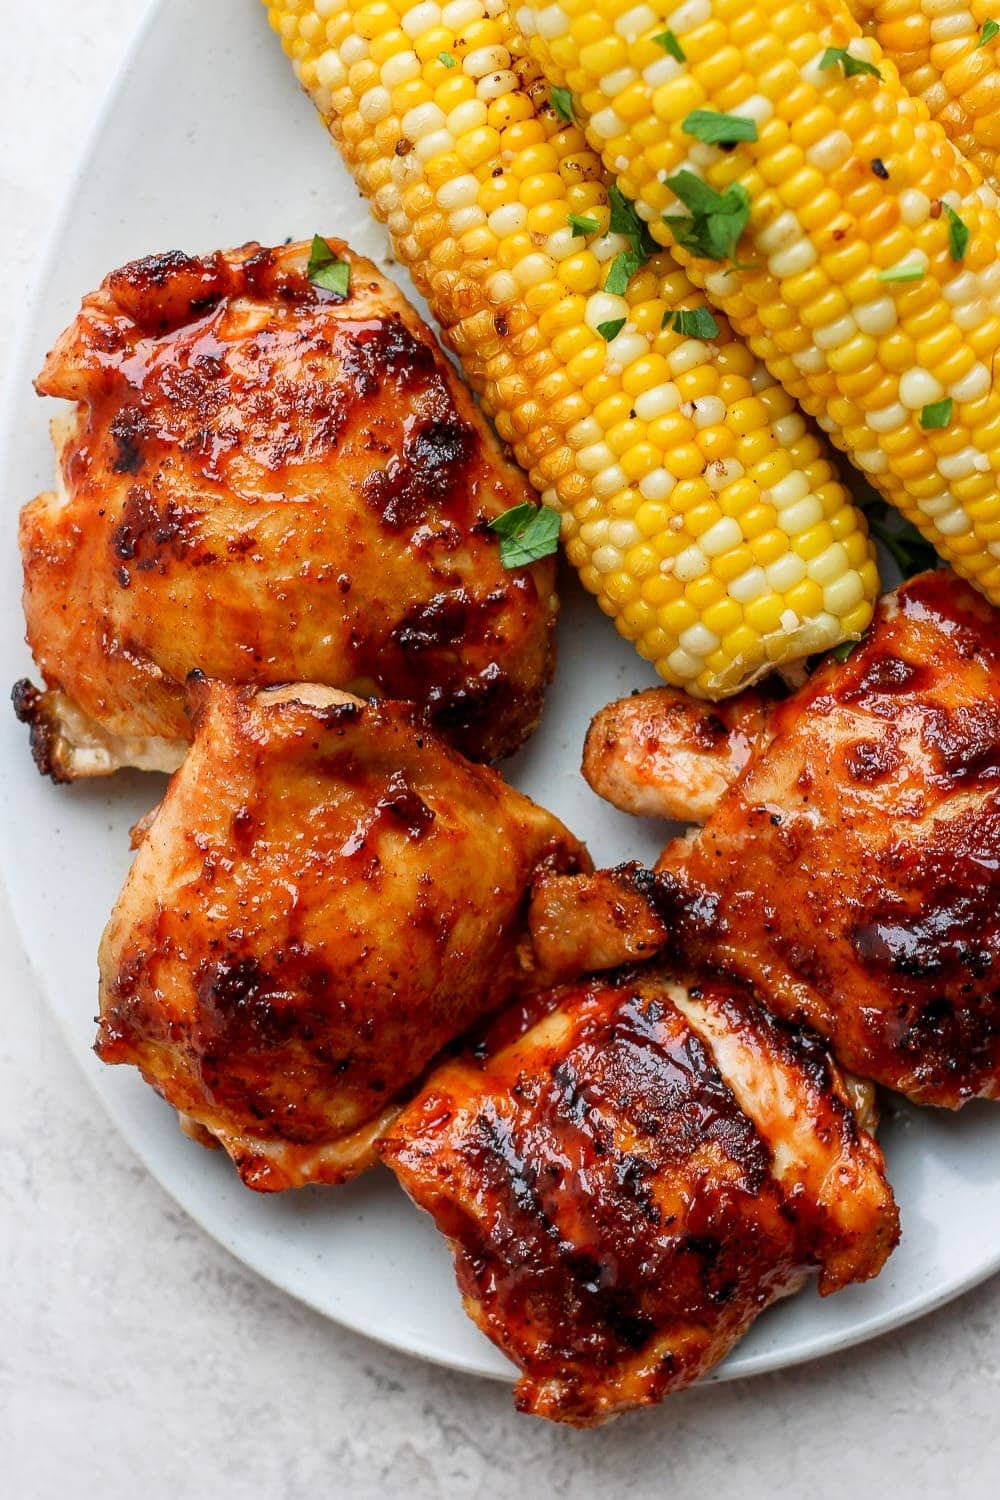 chicken thighs with corn cob on plate.